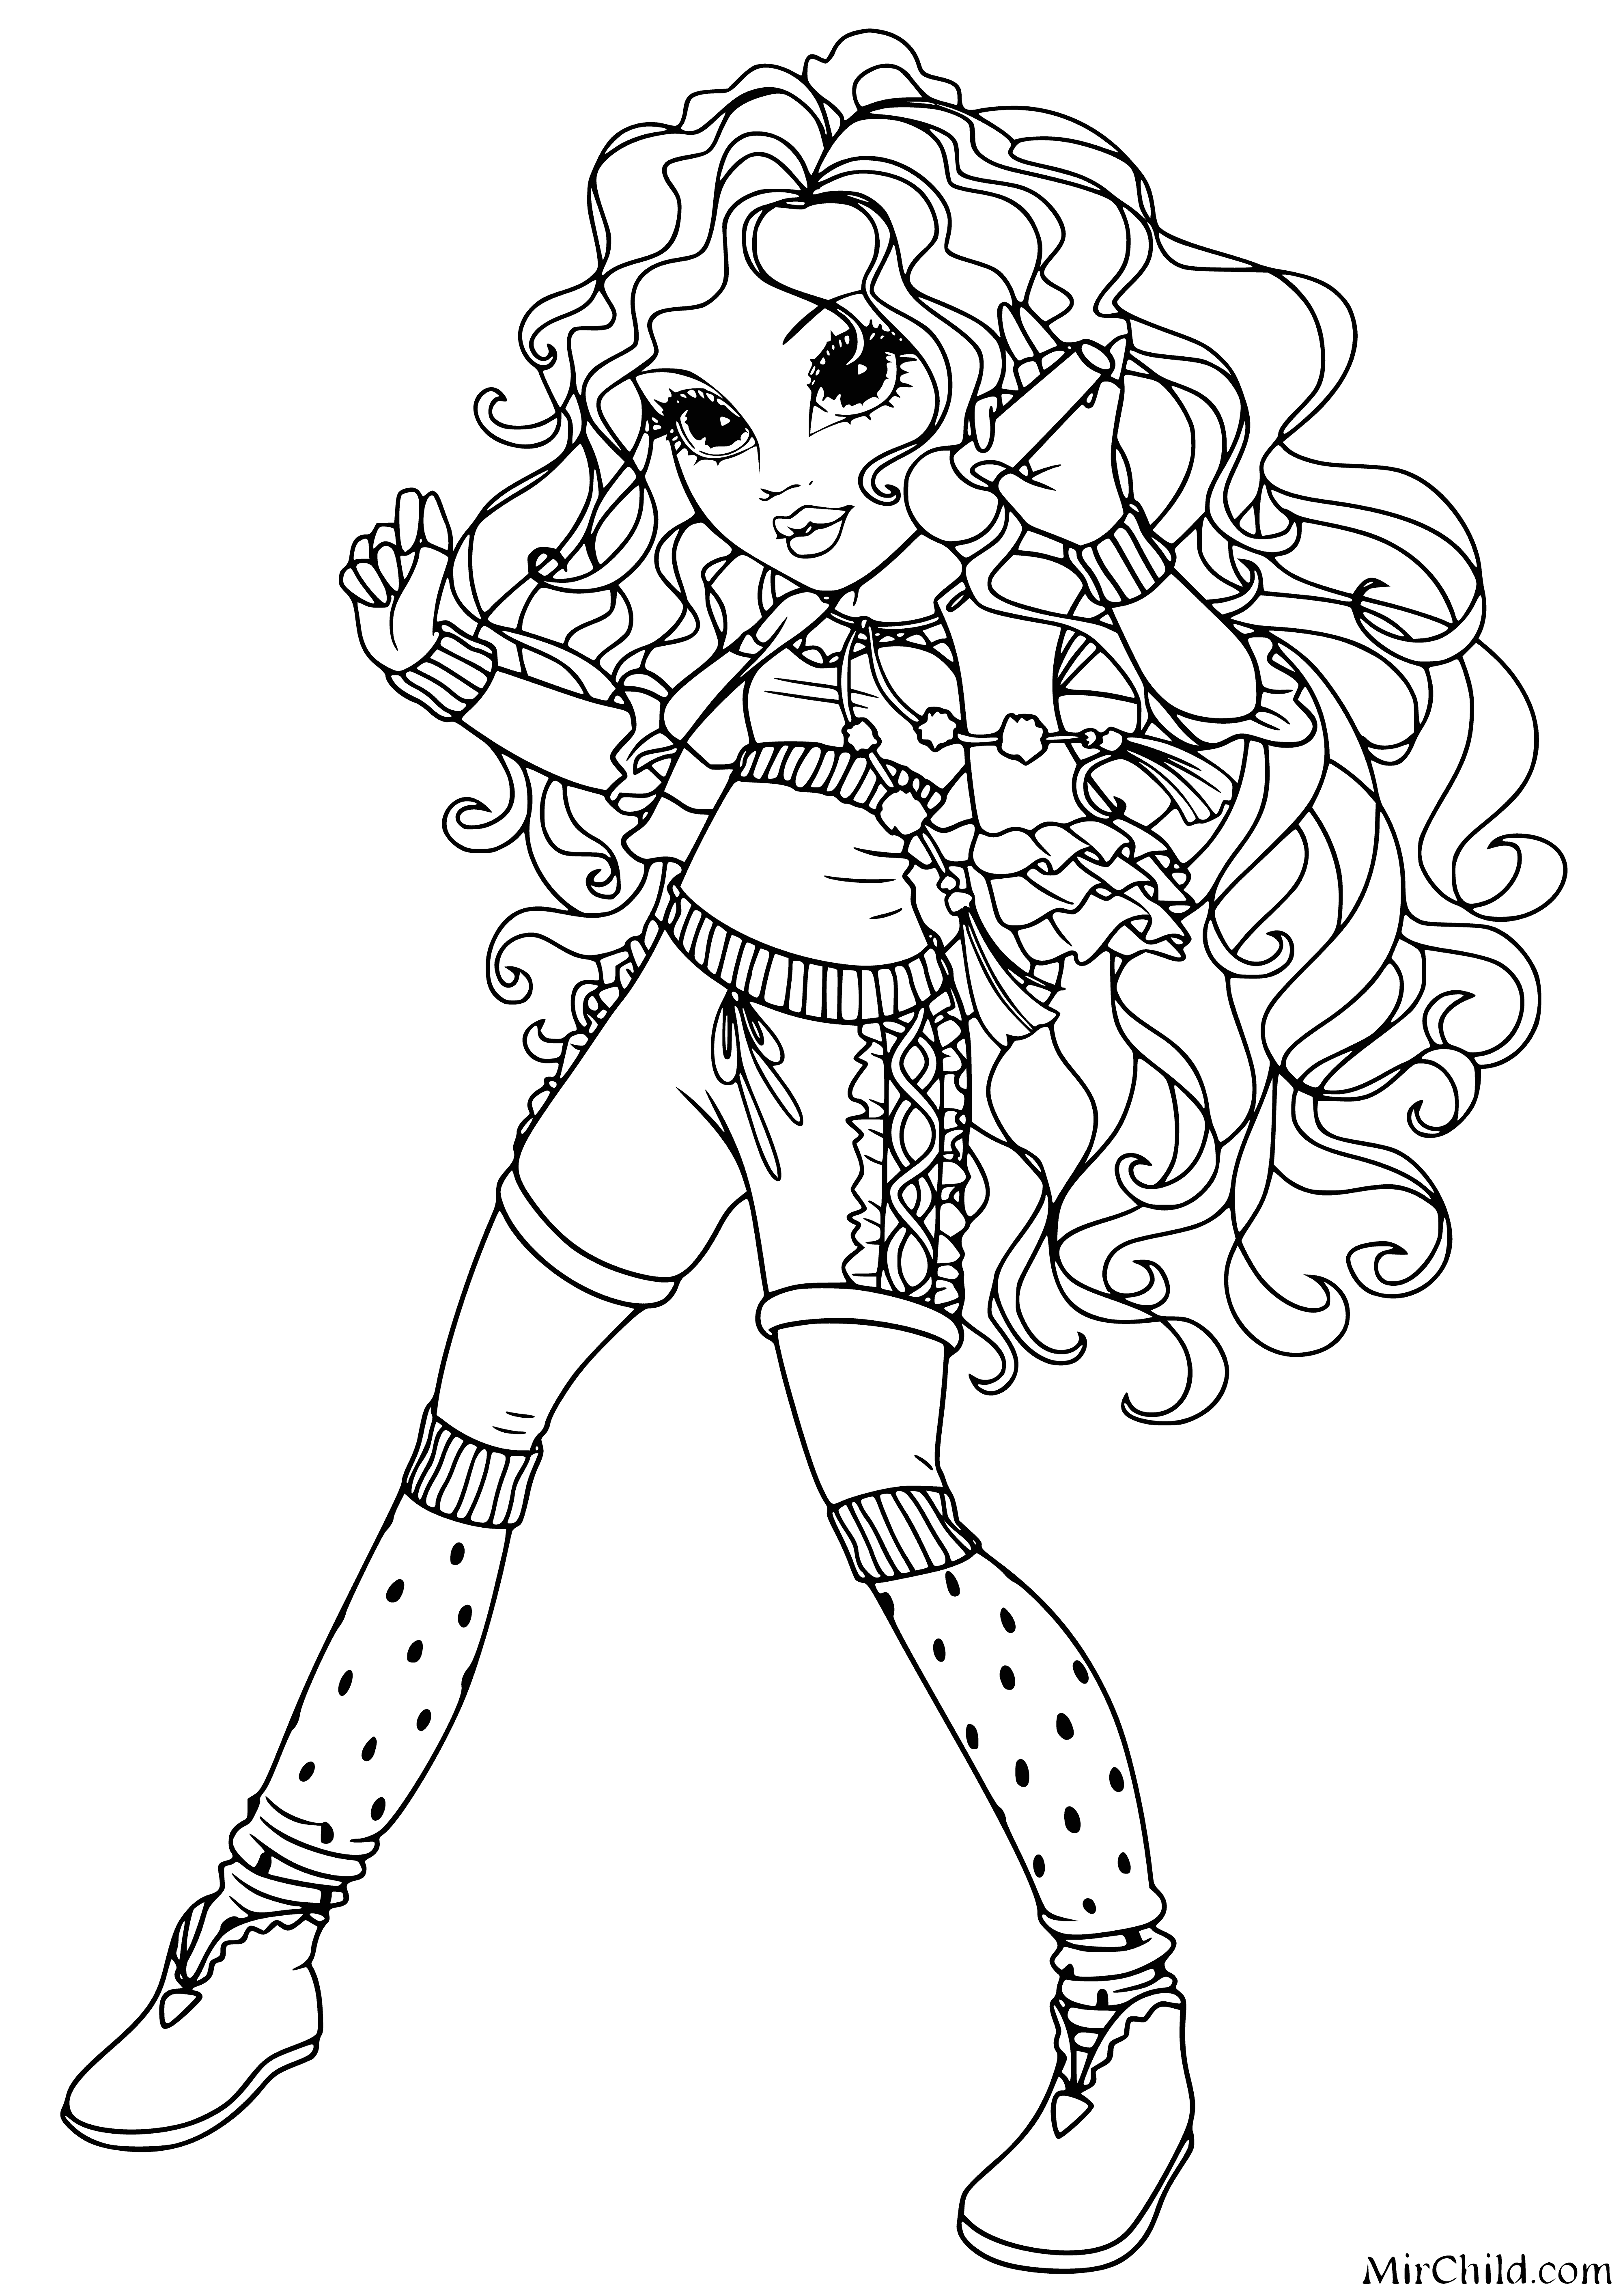 coloring page: Bria is an outgoing leader who's confident, determined and empowered; always up for a challenge and pushing boundaries while having fun and looking out for others.